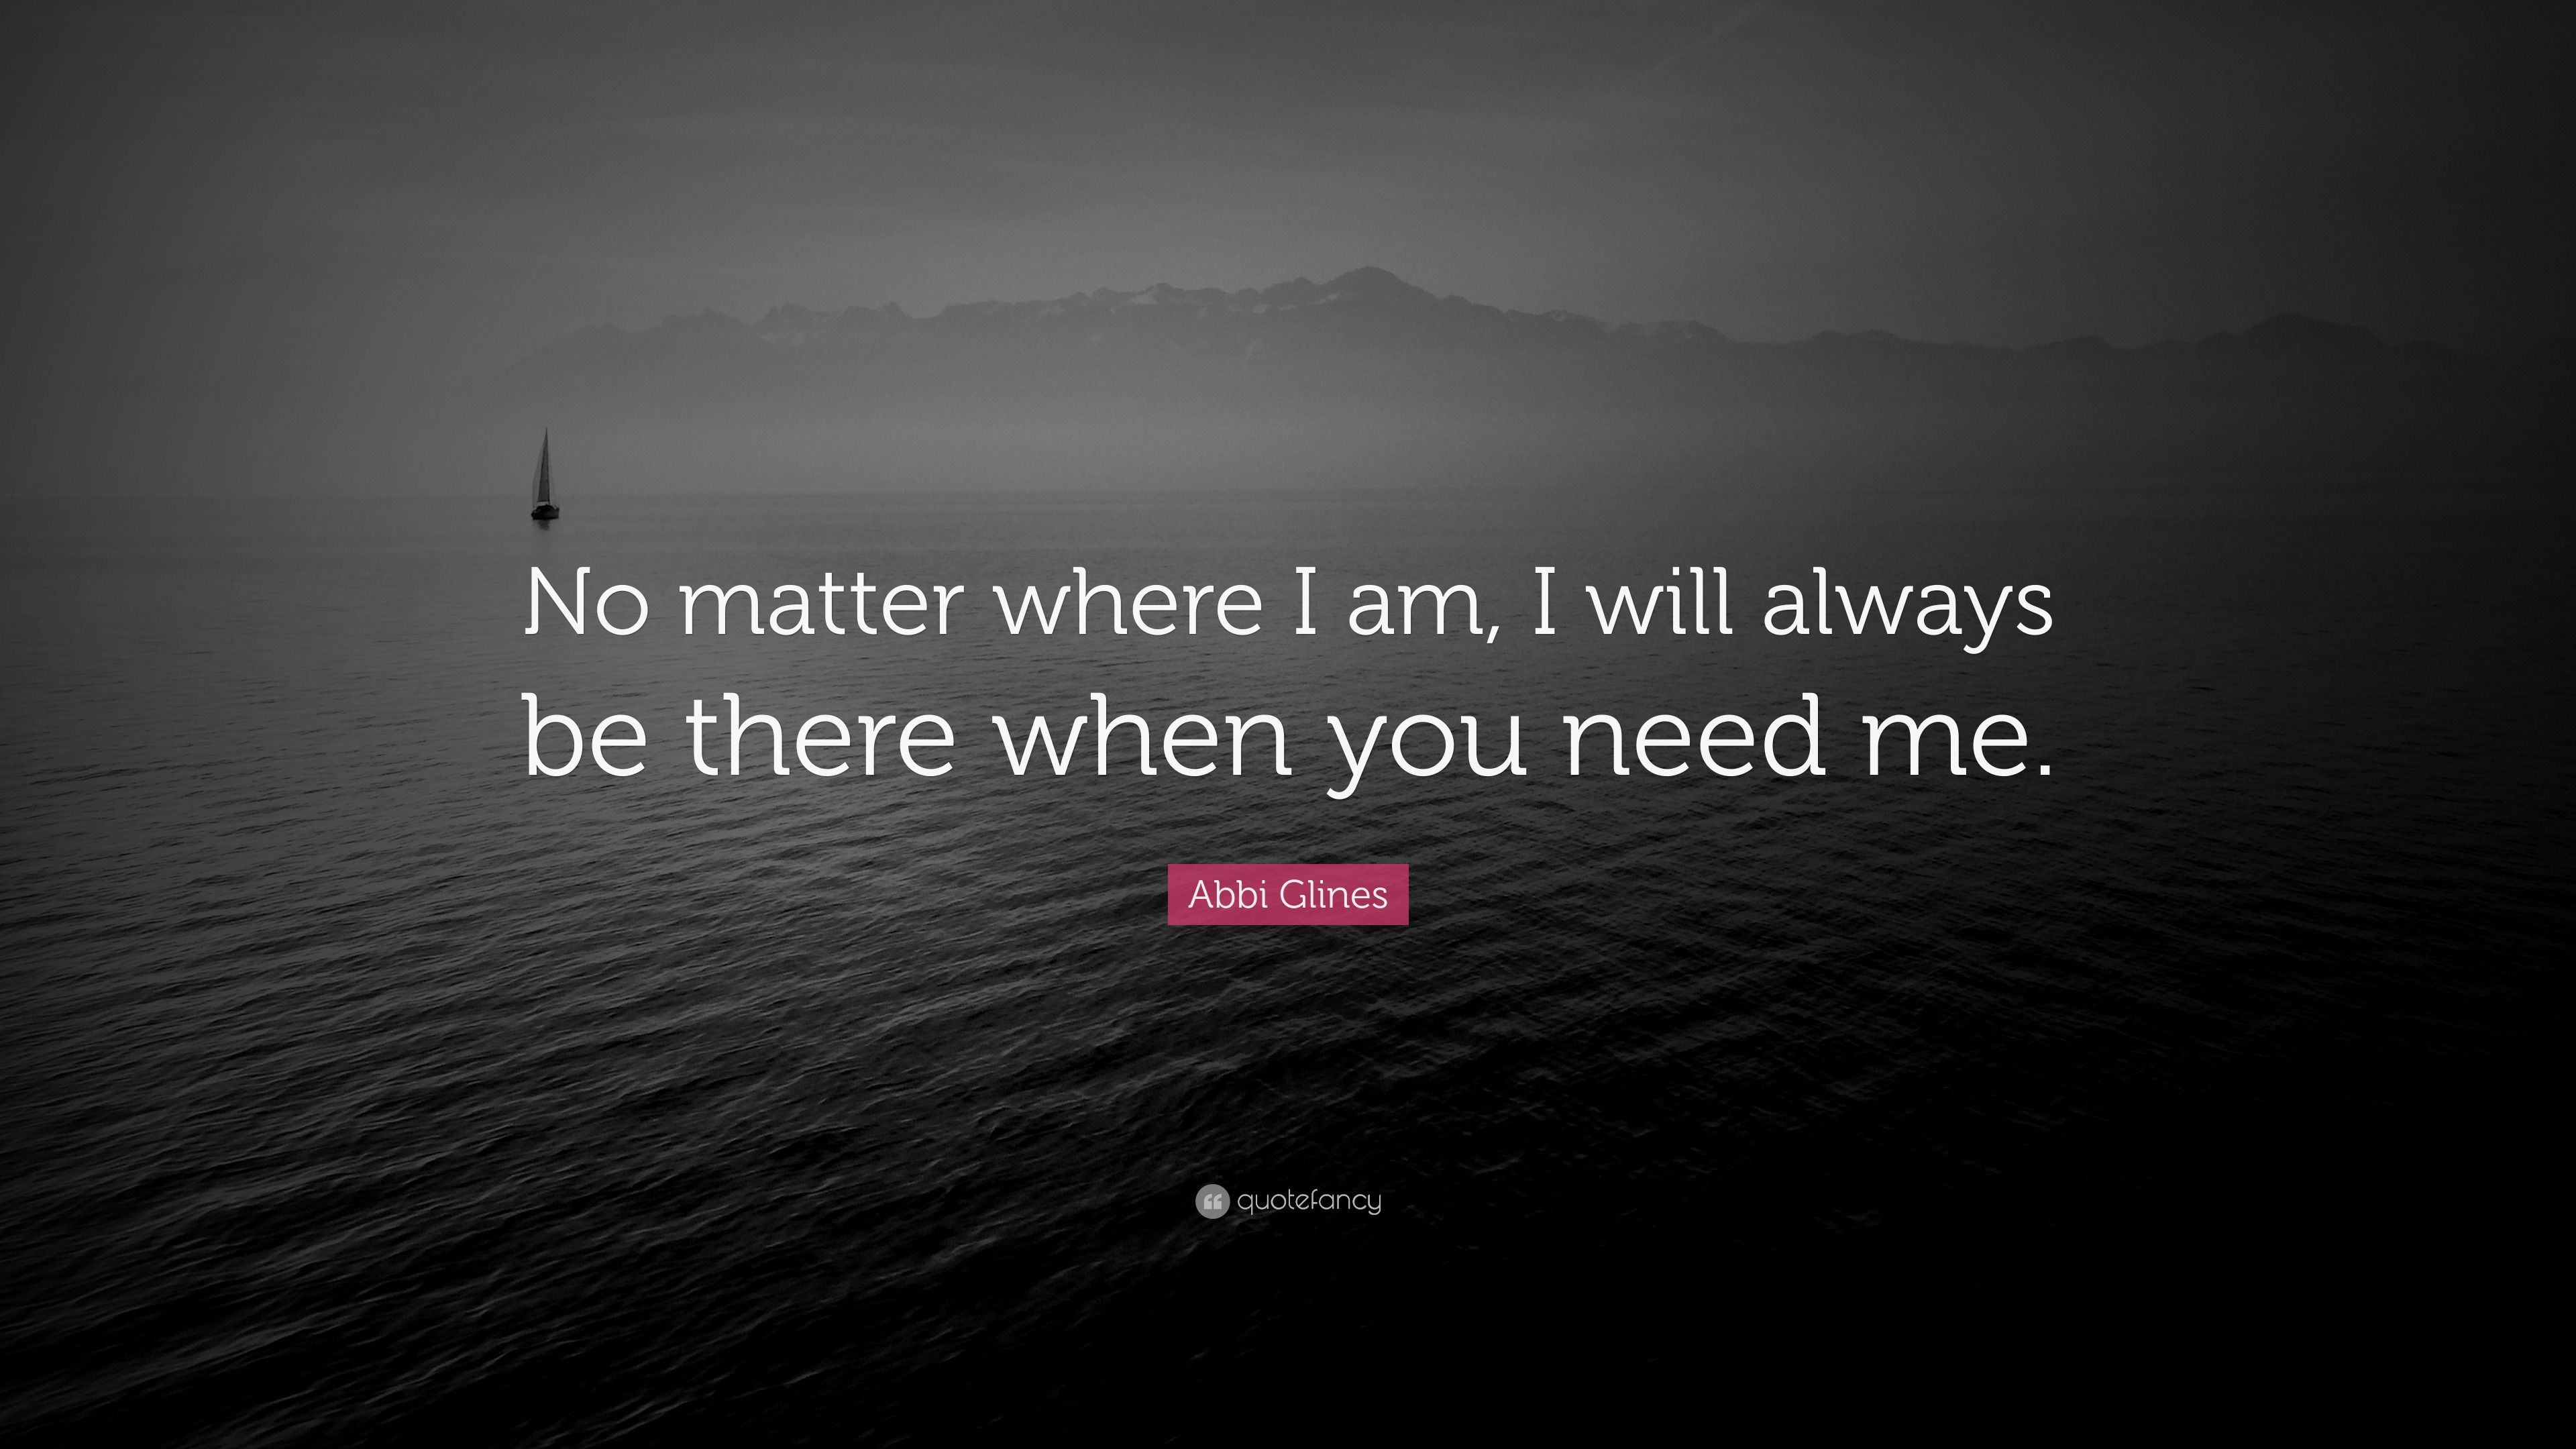 Abbi Glines Quote No Matter Where I Am I Will Always Be There When You Need